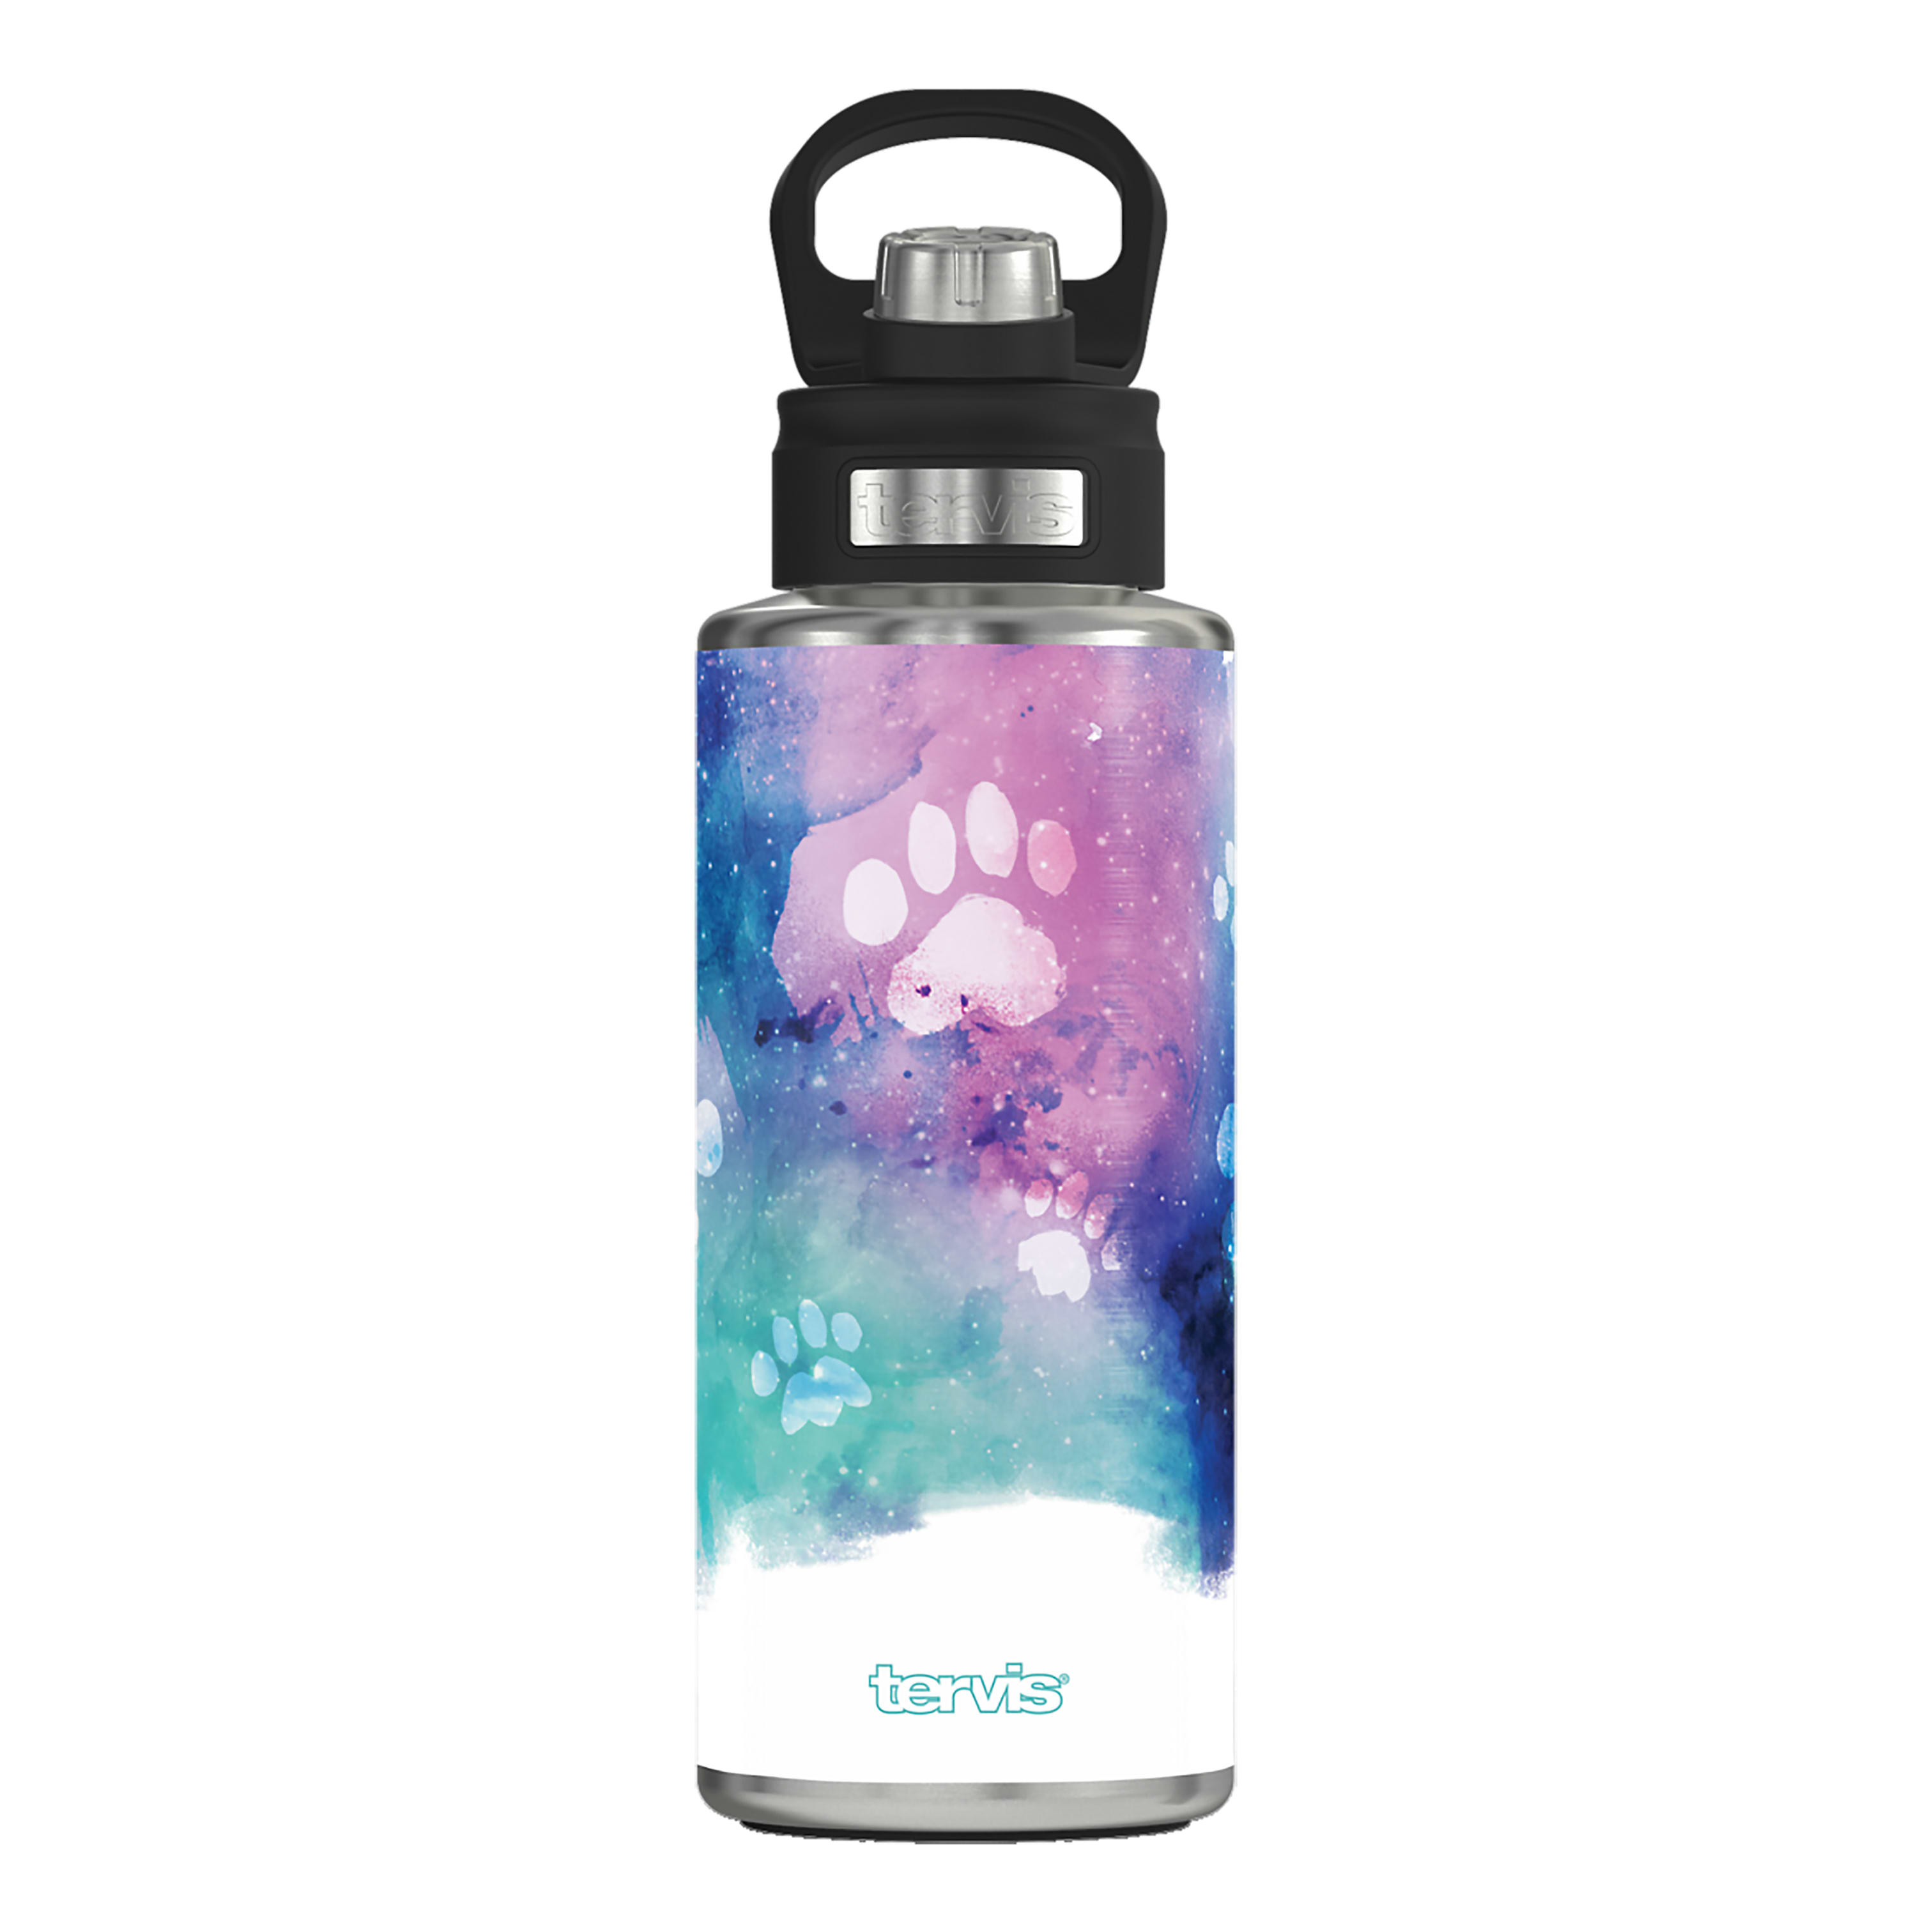 Tervis 32 oz. Wide Mouth Stainless Steel Water Bottle - Paw Prints